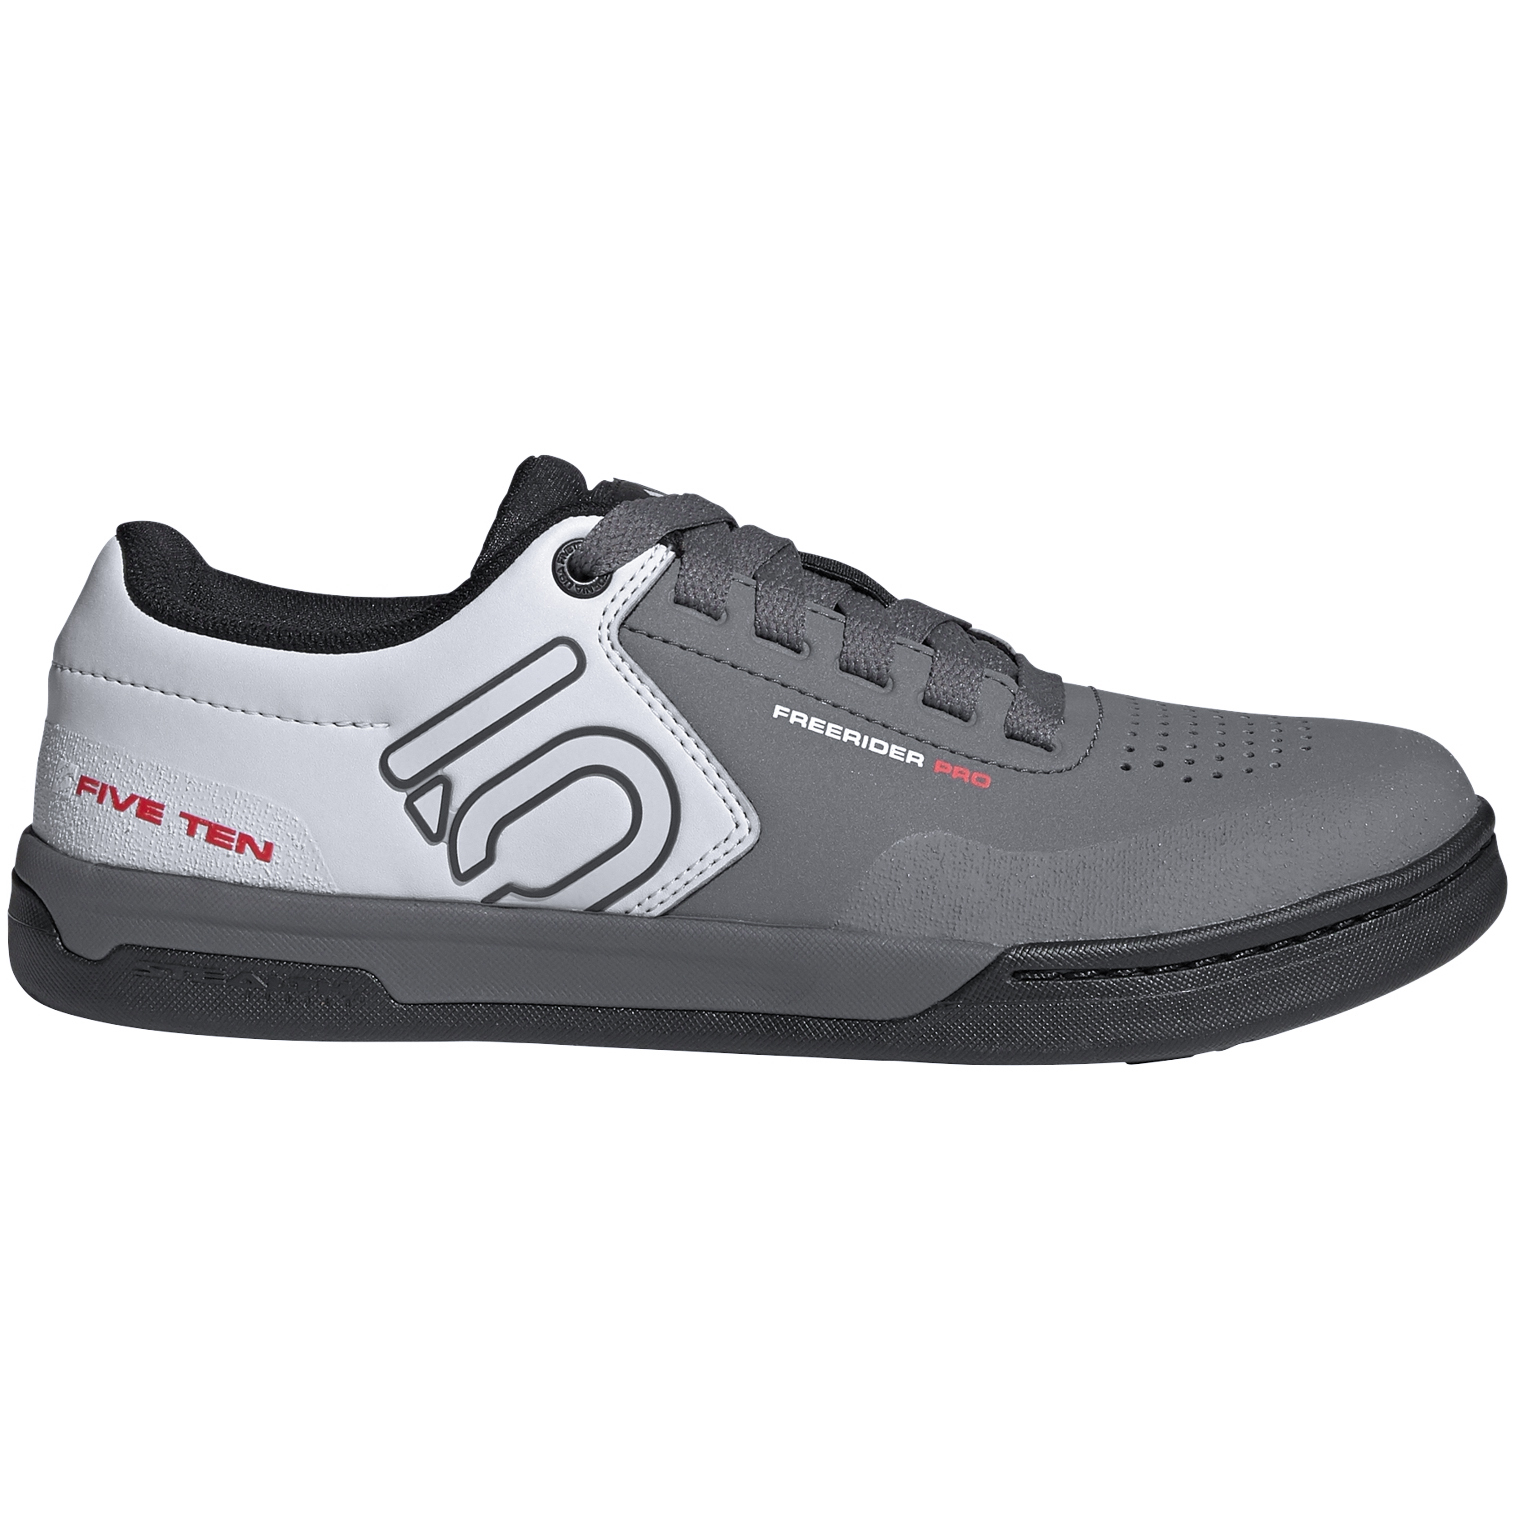 Five Ten Shoes & Footwear for Professional Cycling | Jenson USA